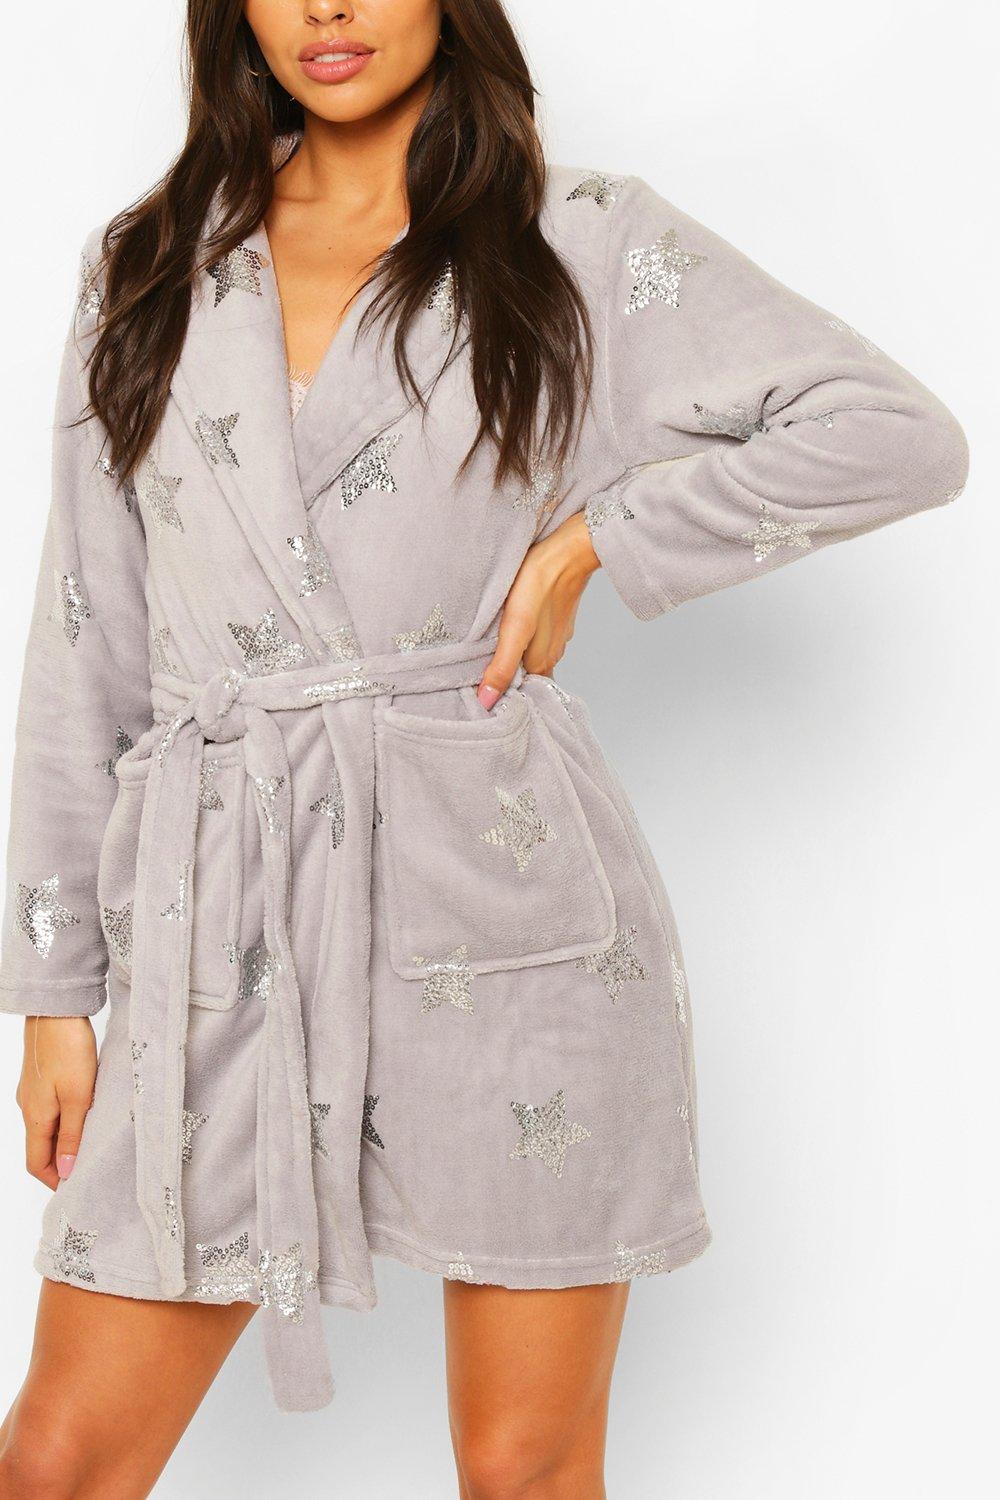 boohoo mens dressing gown